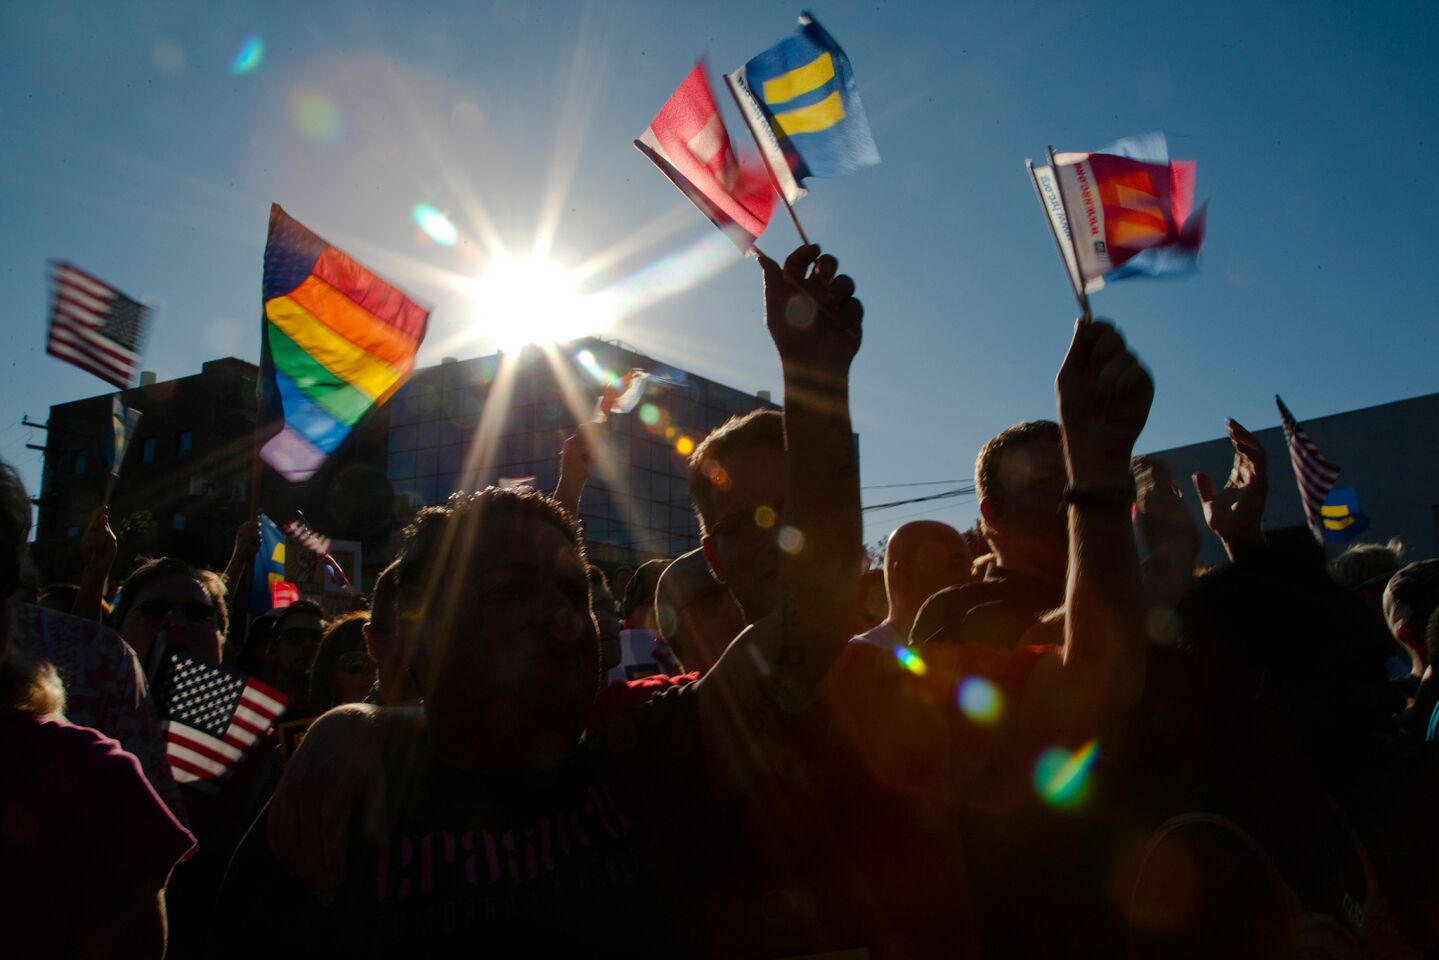 Rainbow flags and flags of equality are raised in West Hollywood.